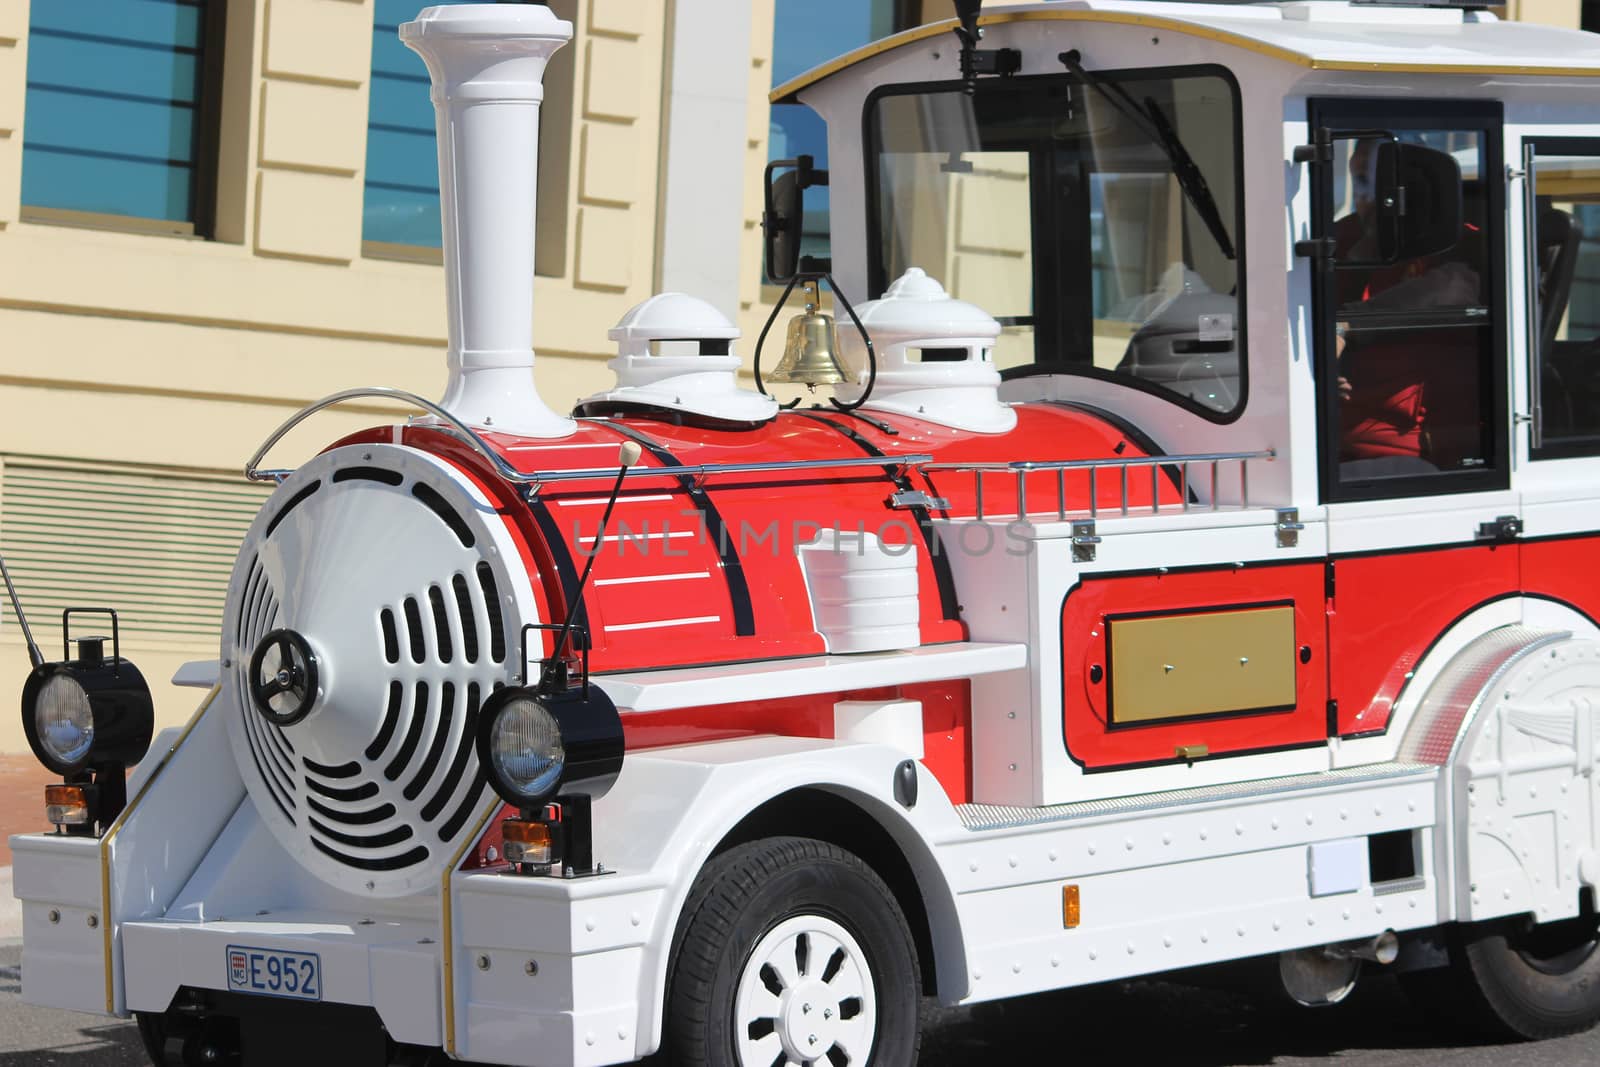 Monte-Carlo, Monaco - March 9, 2016: Red and White Trackless Train for Sightseeing in Monaco on the Street of Monte-Carlo, Monaco in the south of France